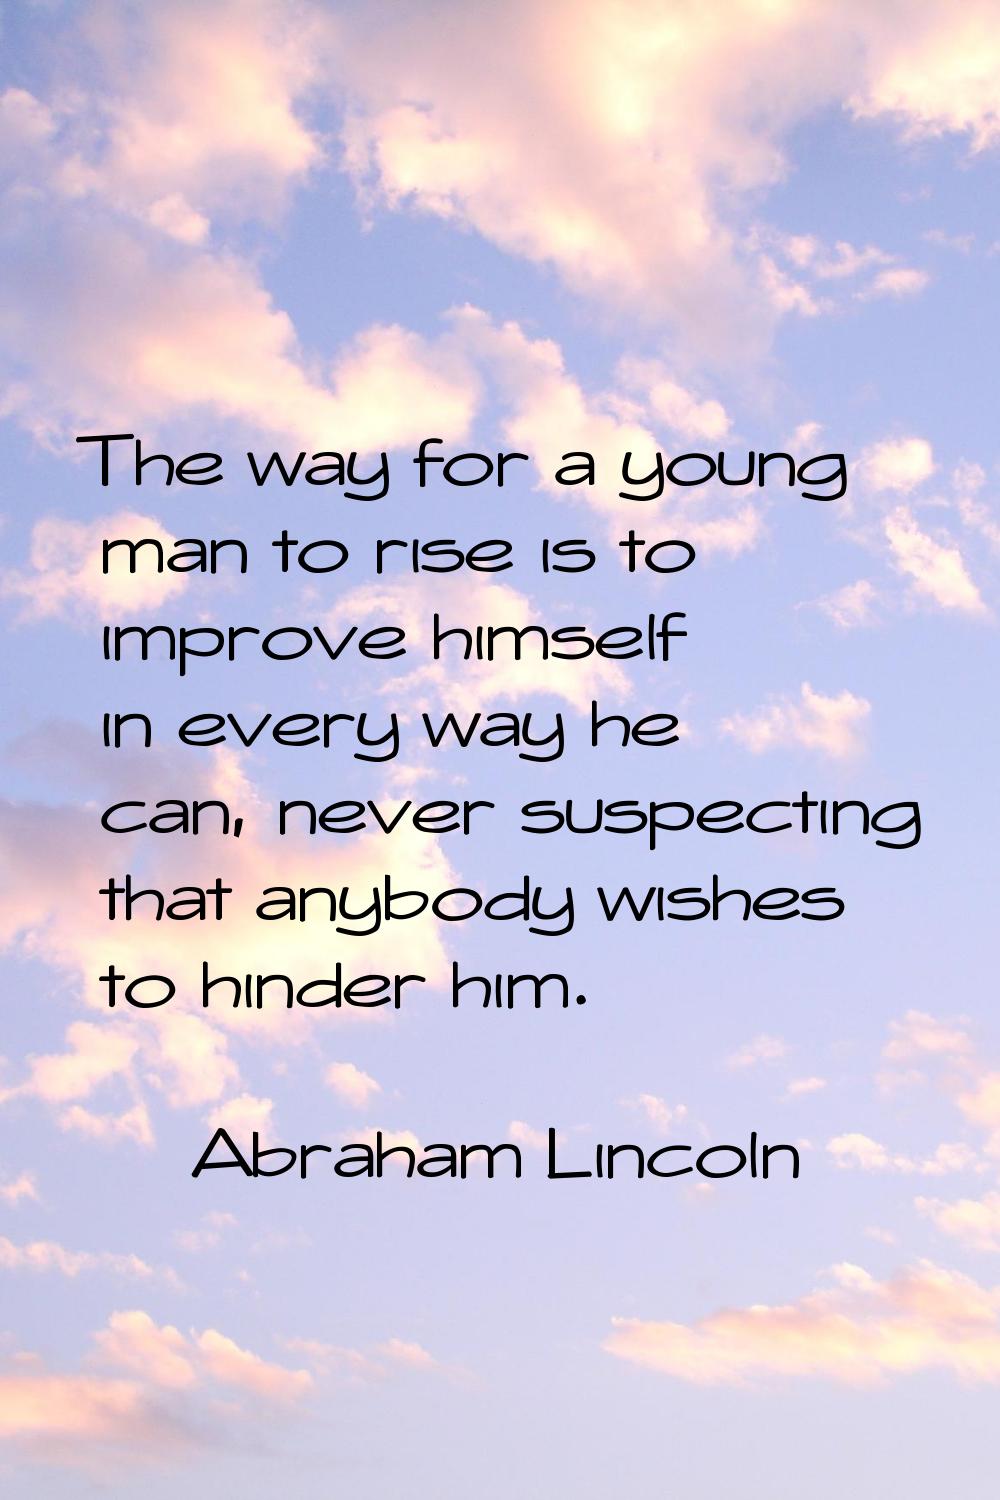 The way for a young man to rise is to improve himself in every way he can, never suspecting that an